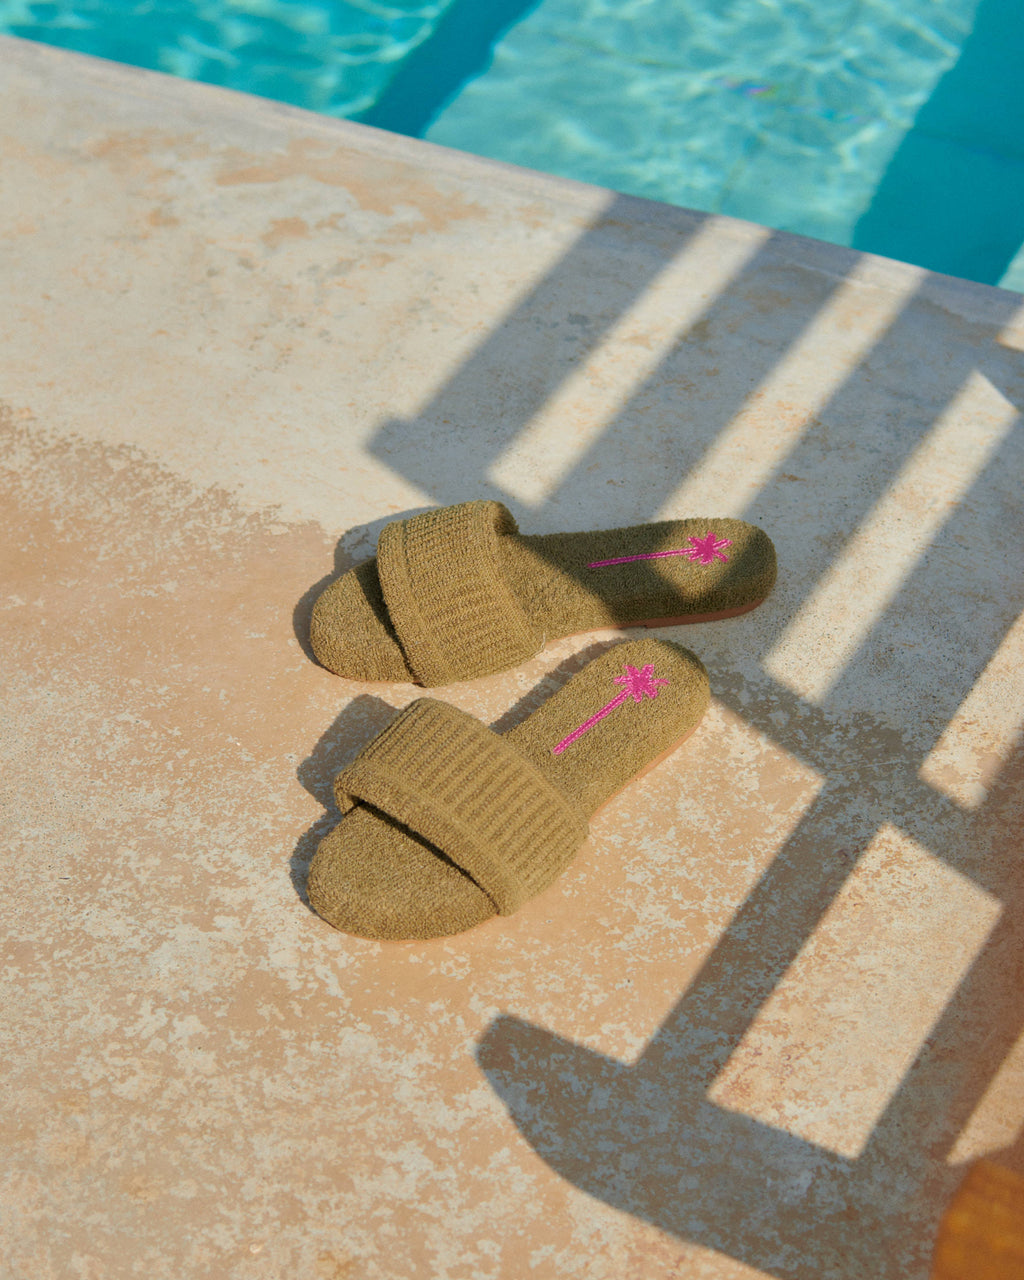 Terry Cotton Sandals with Palm Embroidery - Kaki Green & Pink Palm